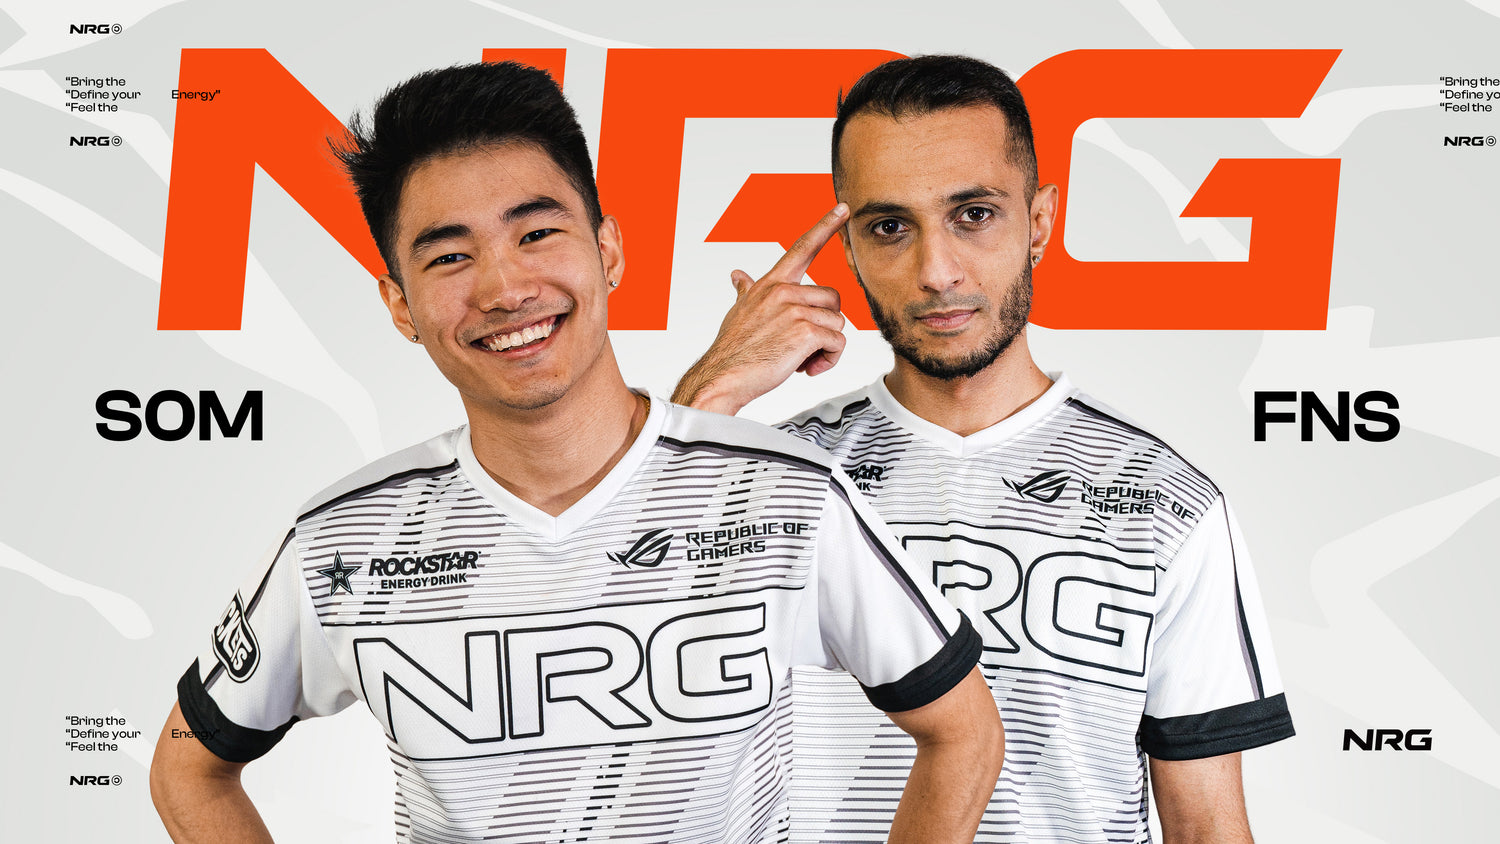 THEY'RE BACK: WELCOME NRG S0M & FNS